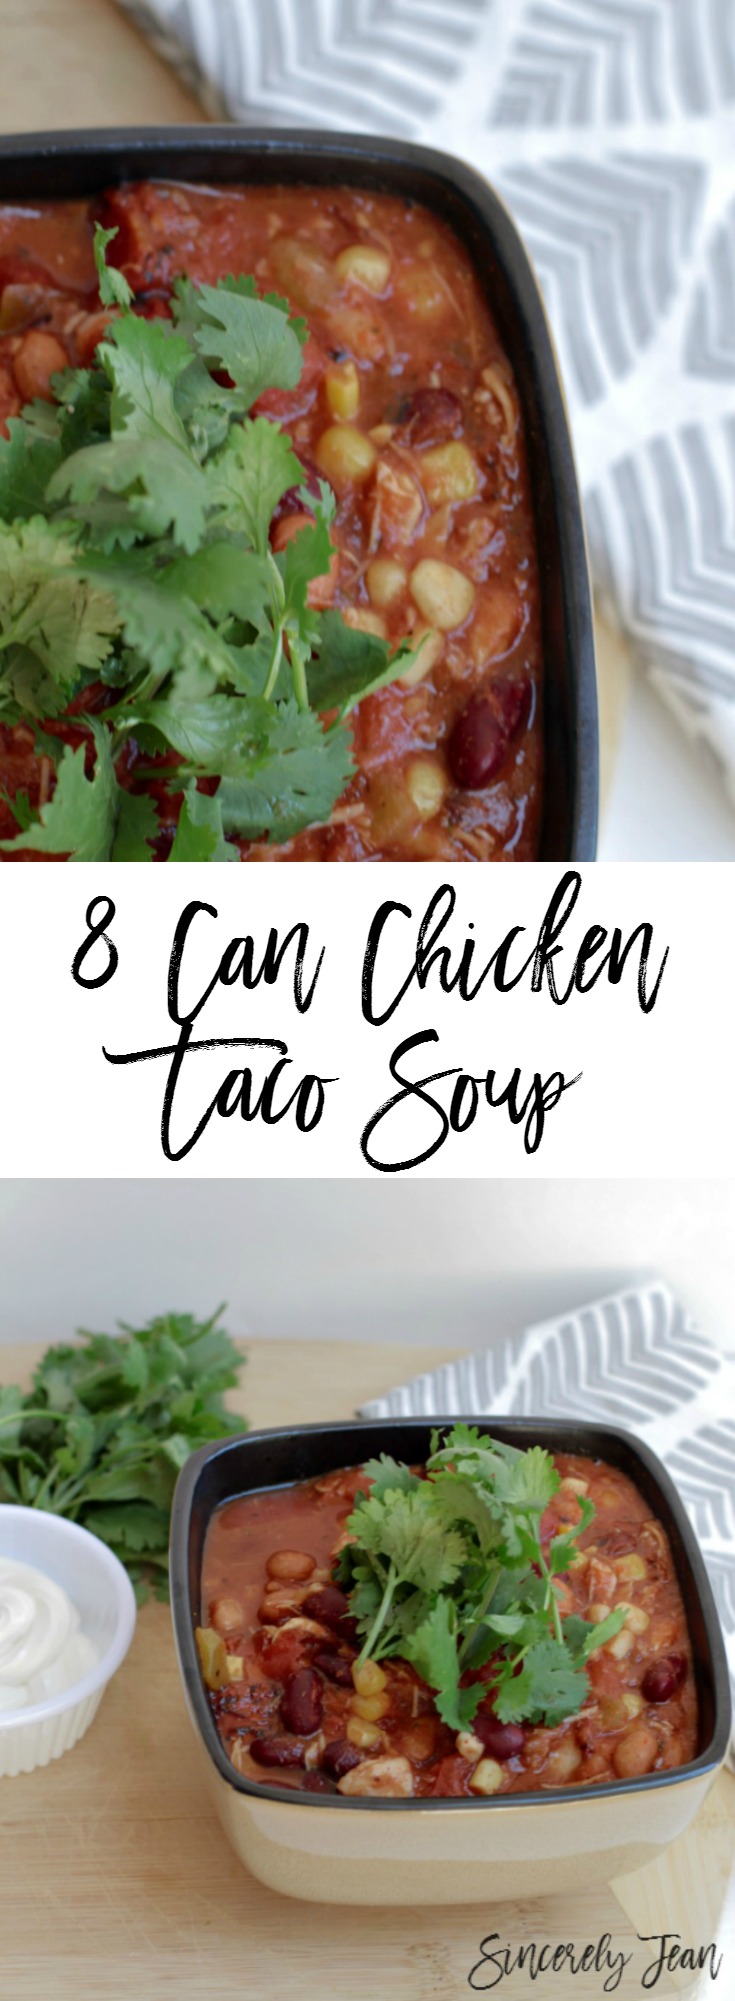 Easy 8 Can Chicken Taco Soup - quick and simple dinner recipe that the entire family will love! | www.SincerelyJean.com